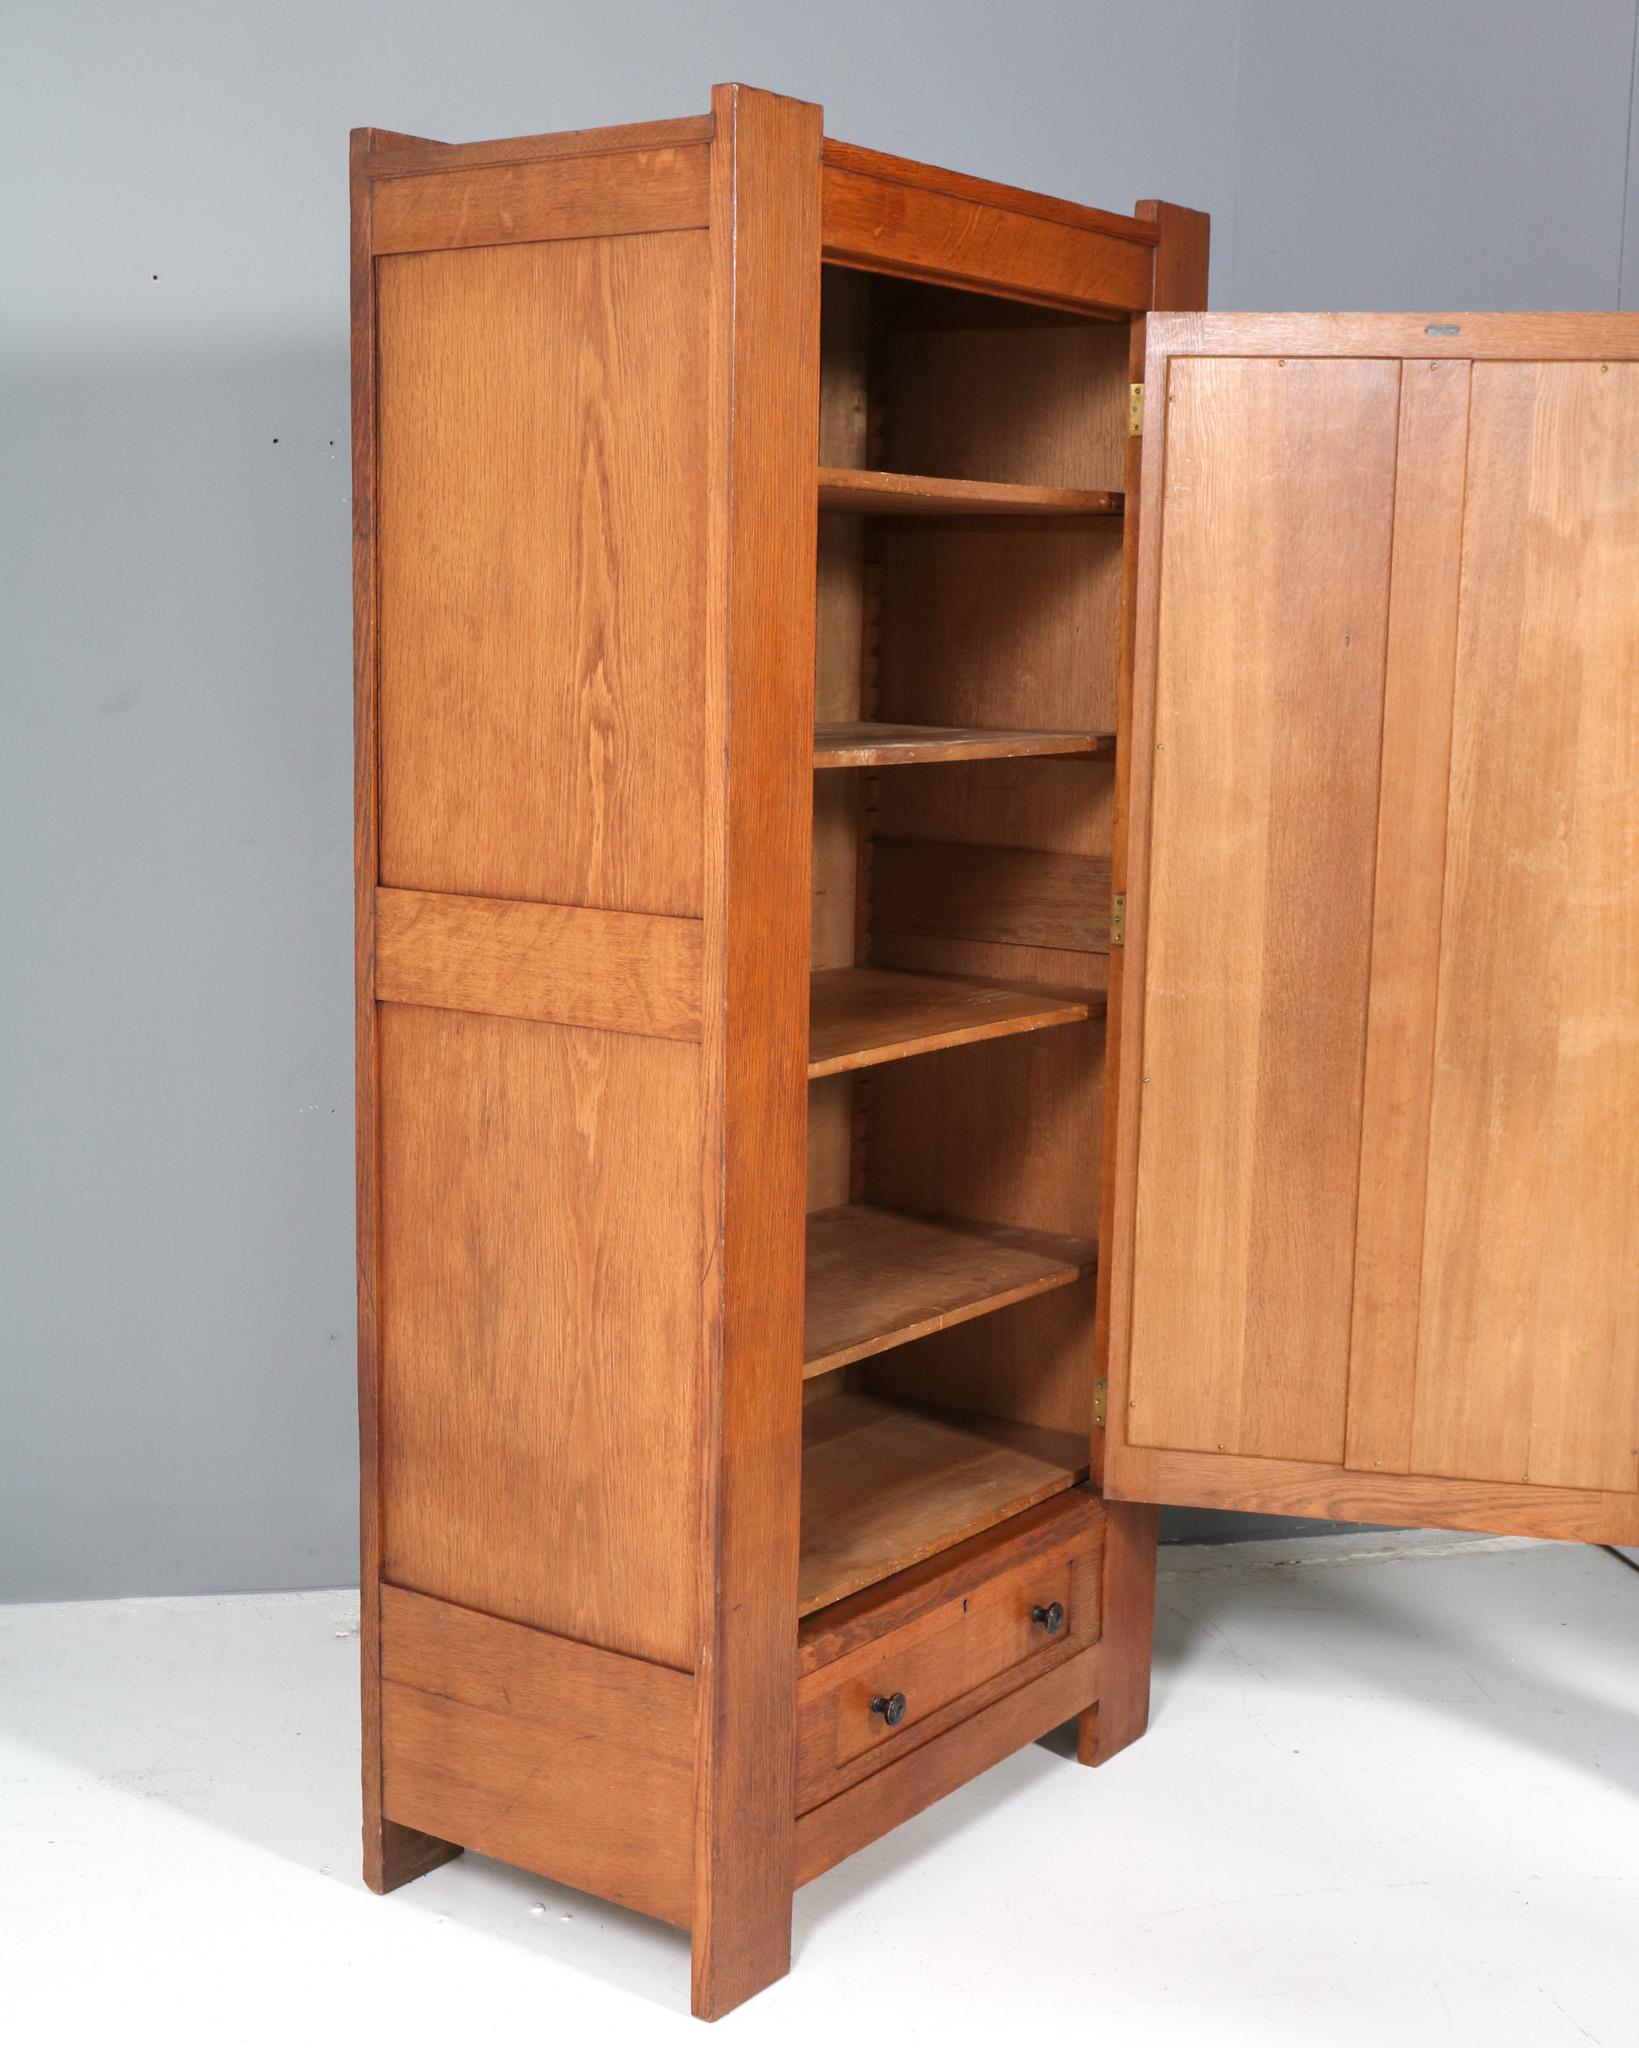 Oak Art Deco Modernist Armoire or Wardrobe by Hendrik Wouda for Pander, 1924 In Good Condition For Sale In Amsterdam, NL